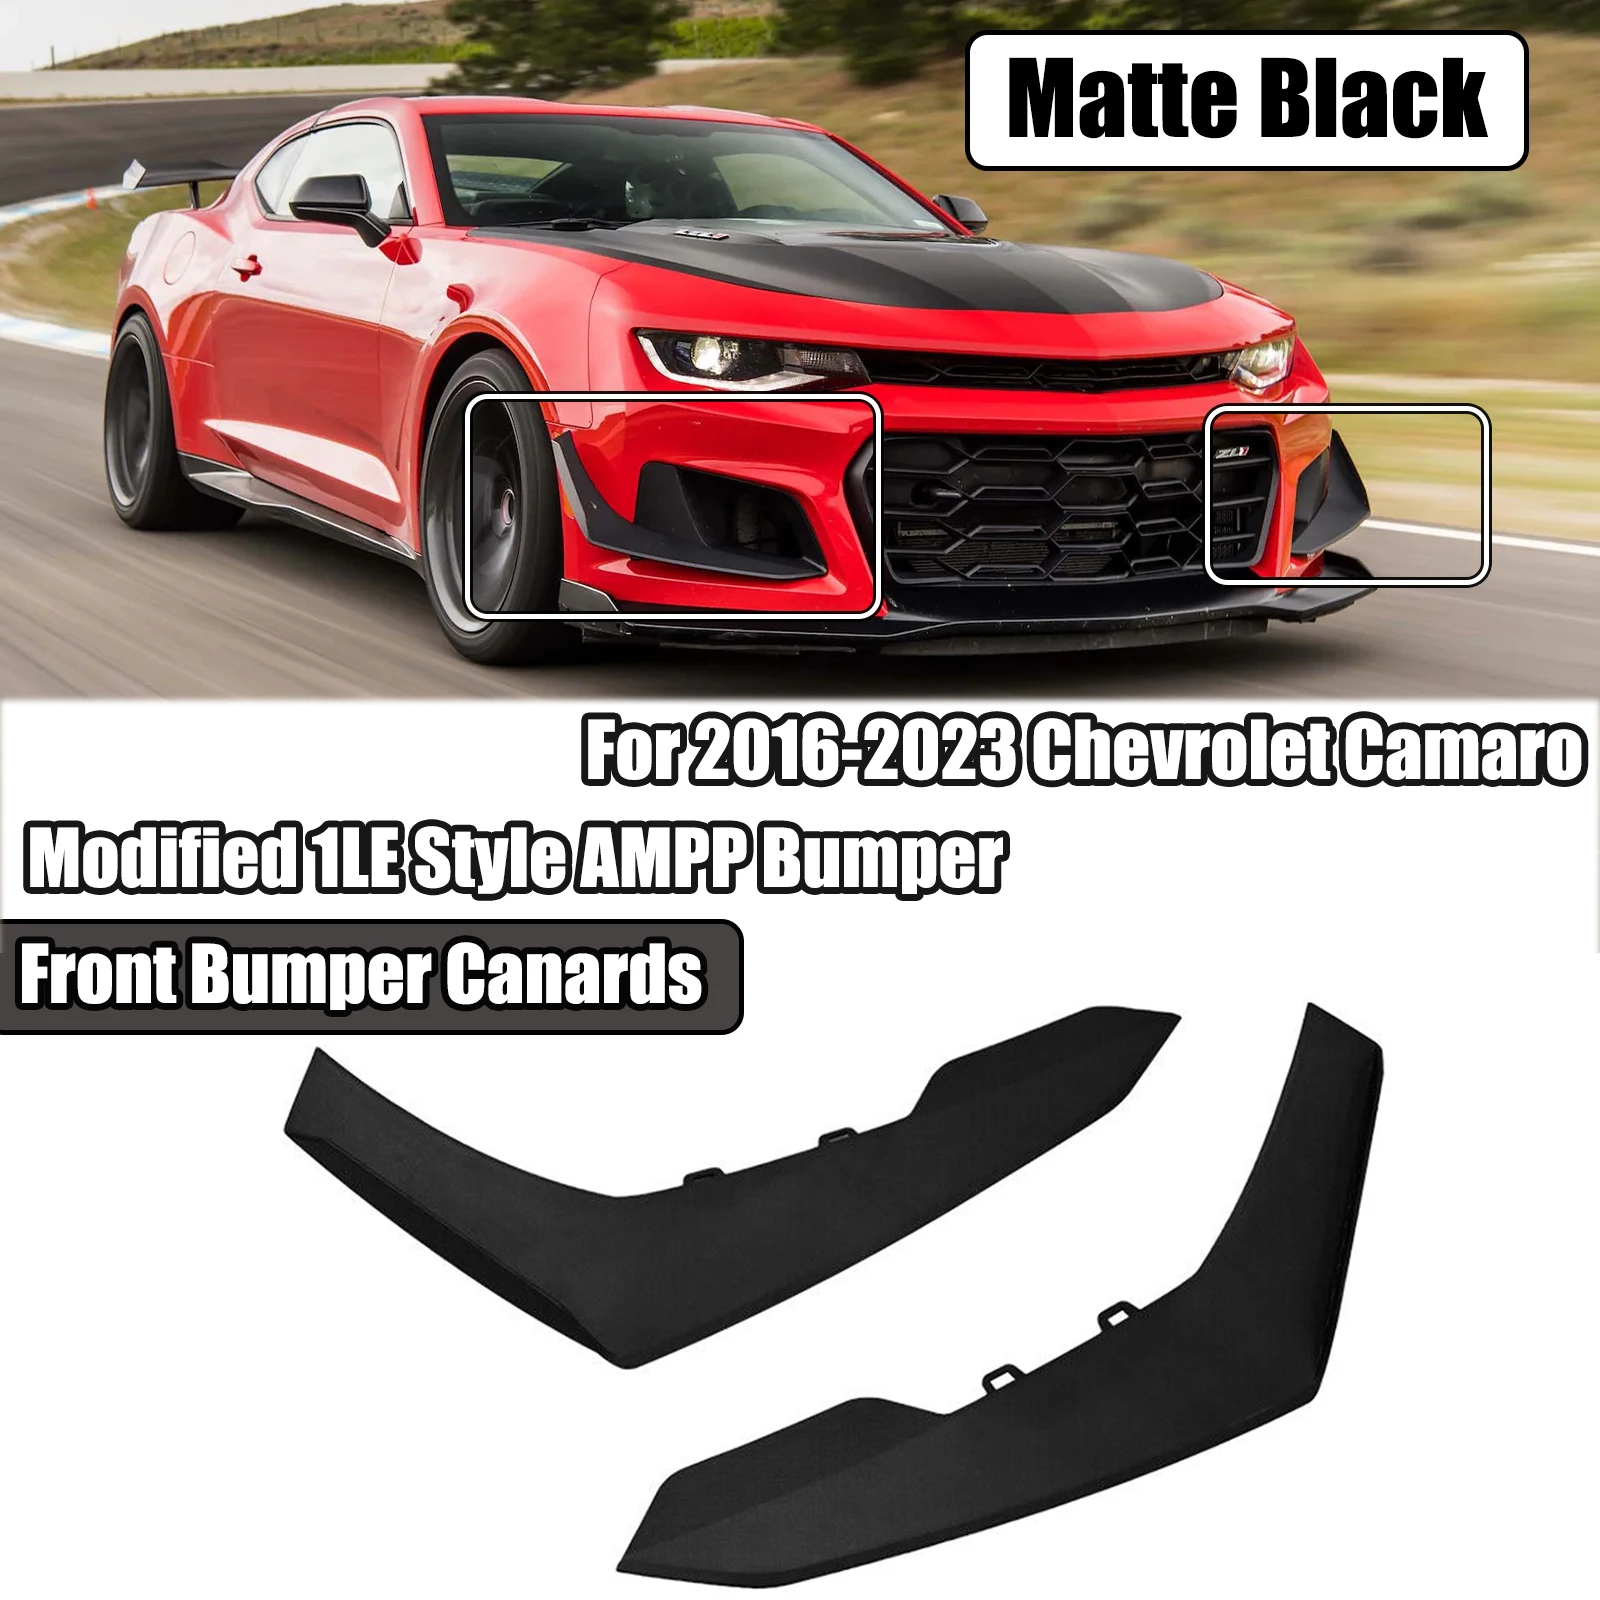 

For 2016-2023 Chevrolet Camaro Modified With 1LE Style AMPP Bumper Matte Black Replacement Front Bumper Side Splitter Canards PP